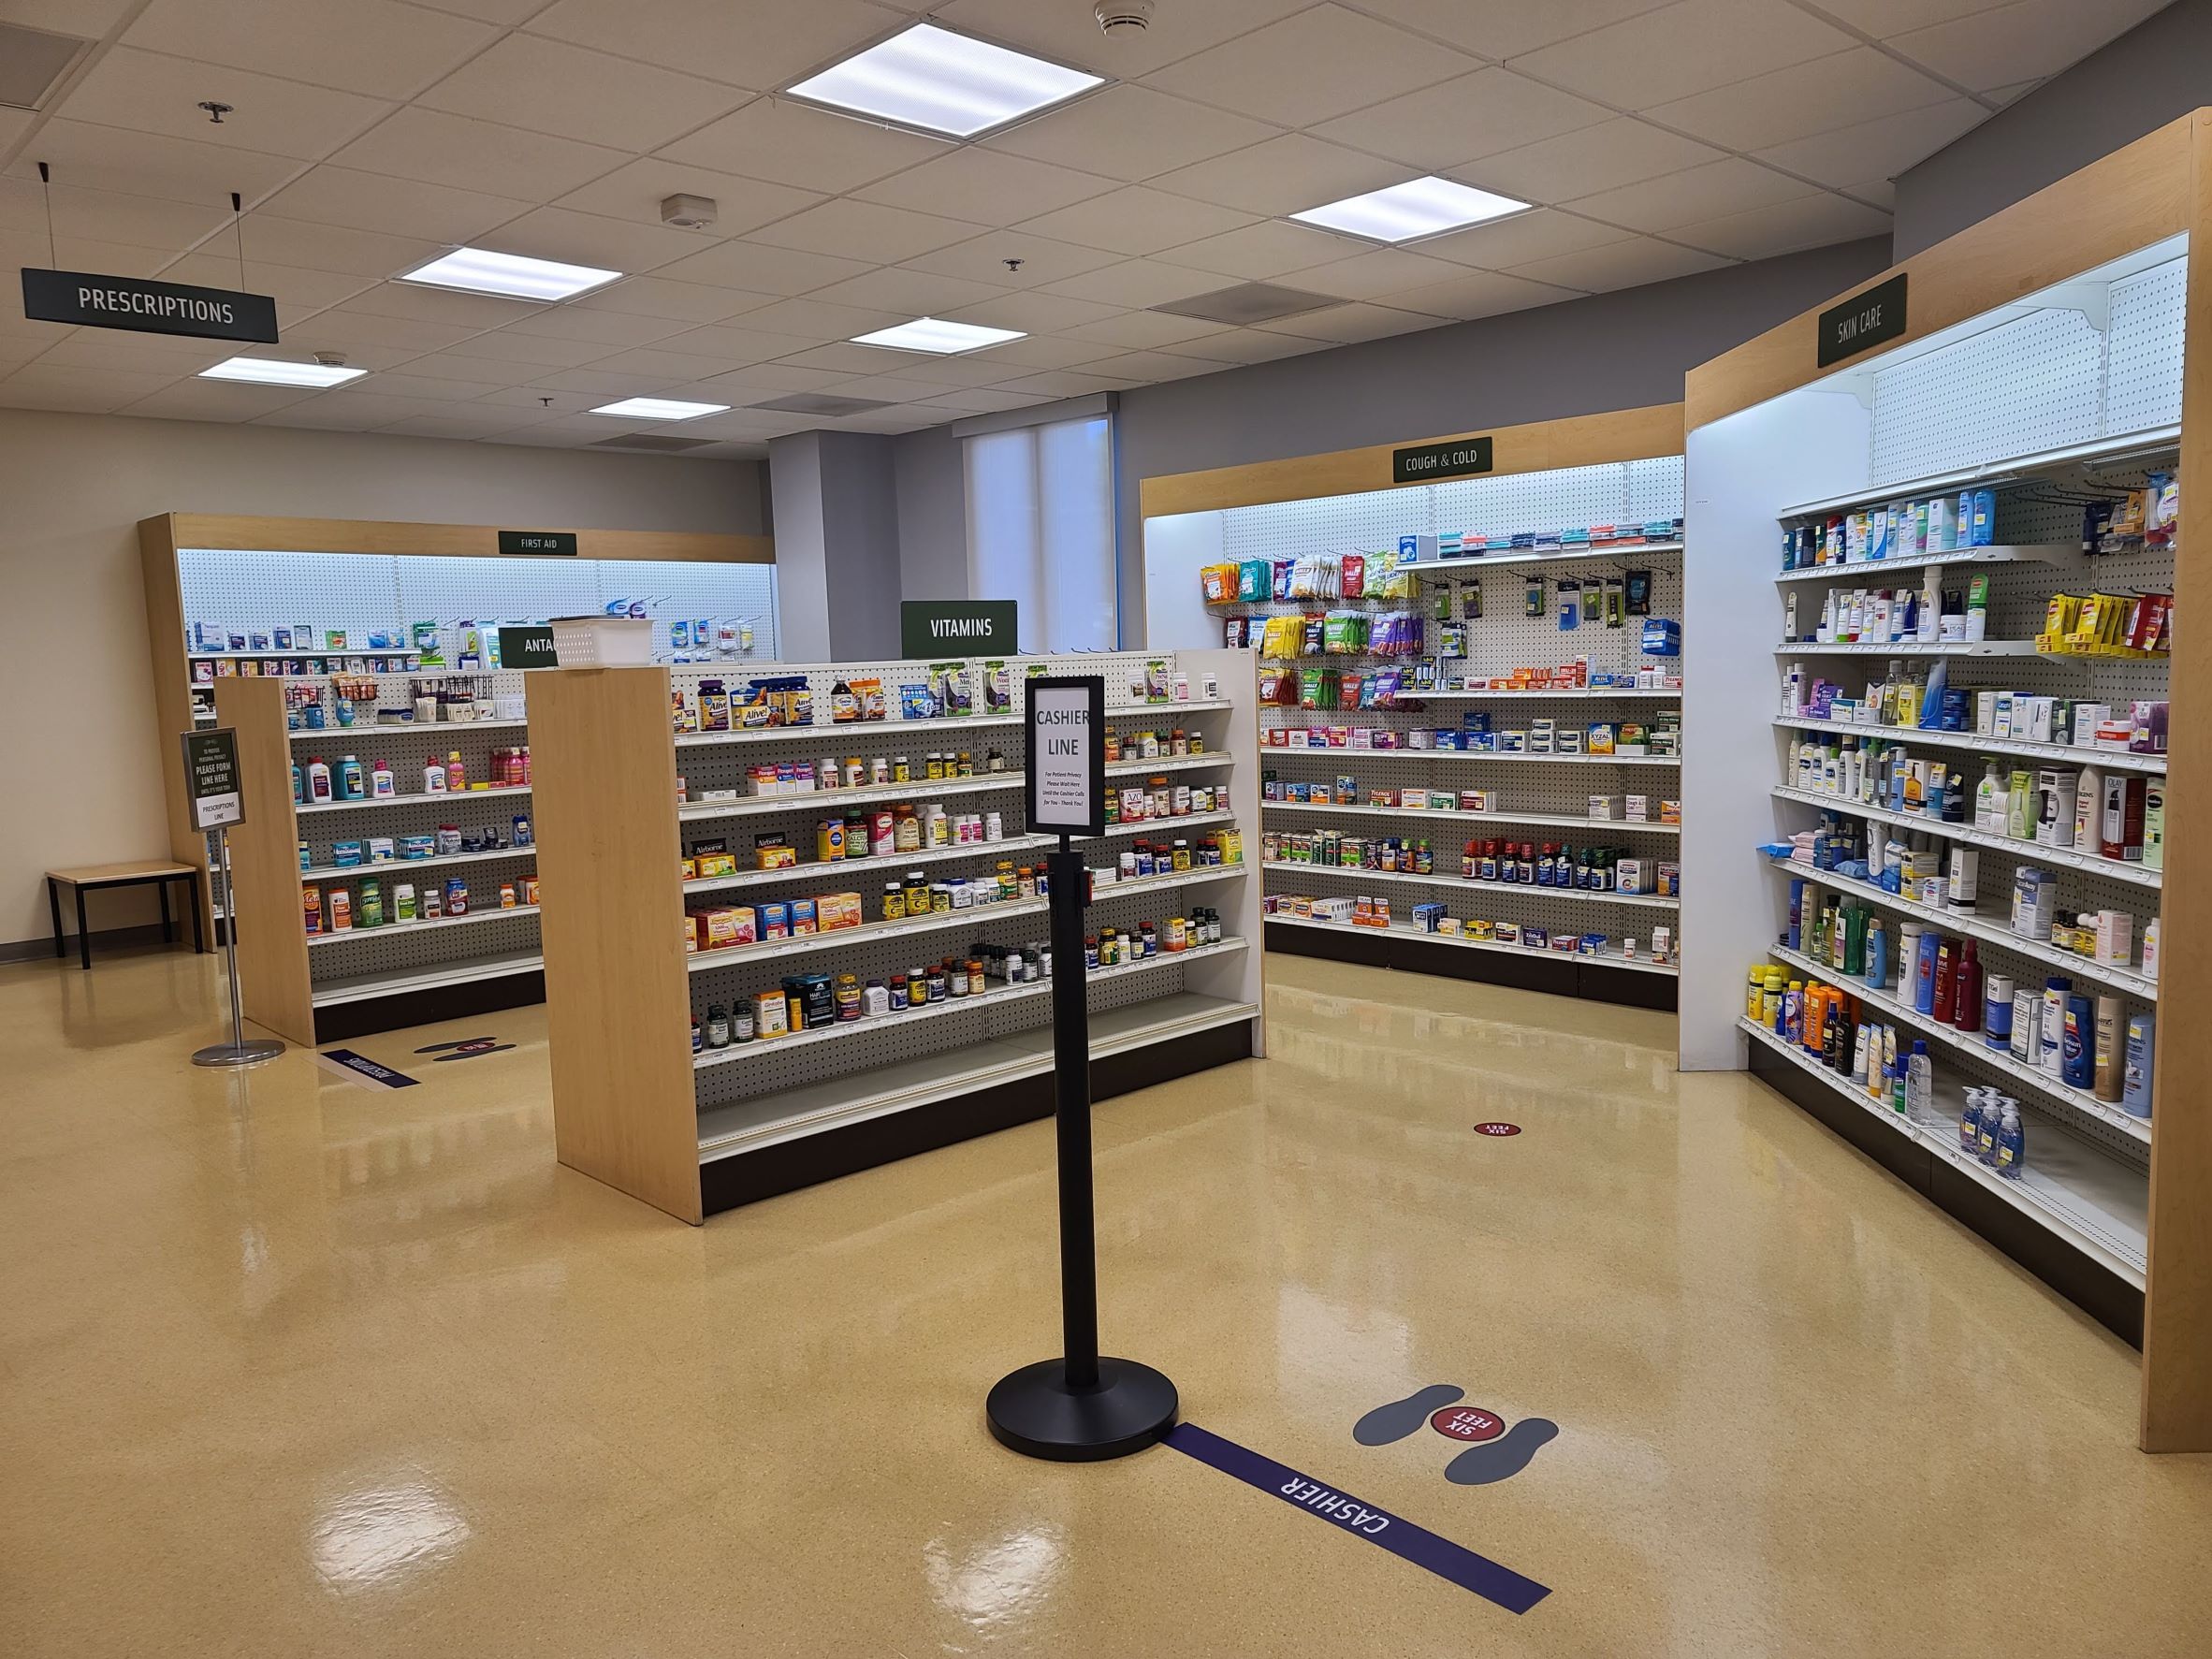 Over the counter medication section